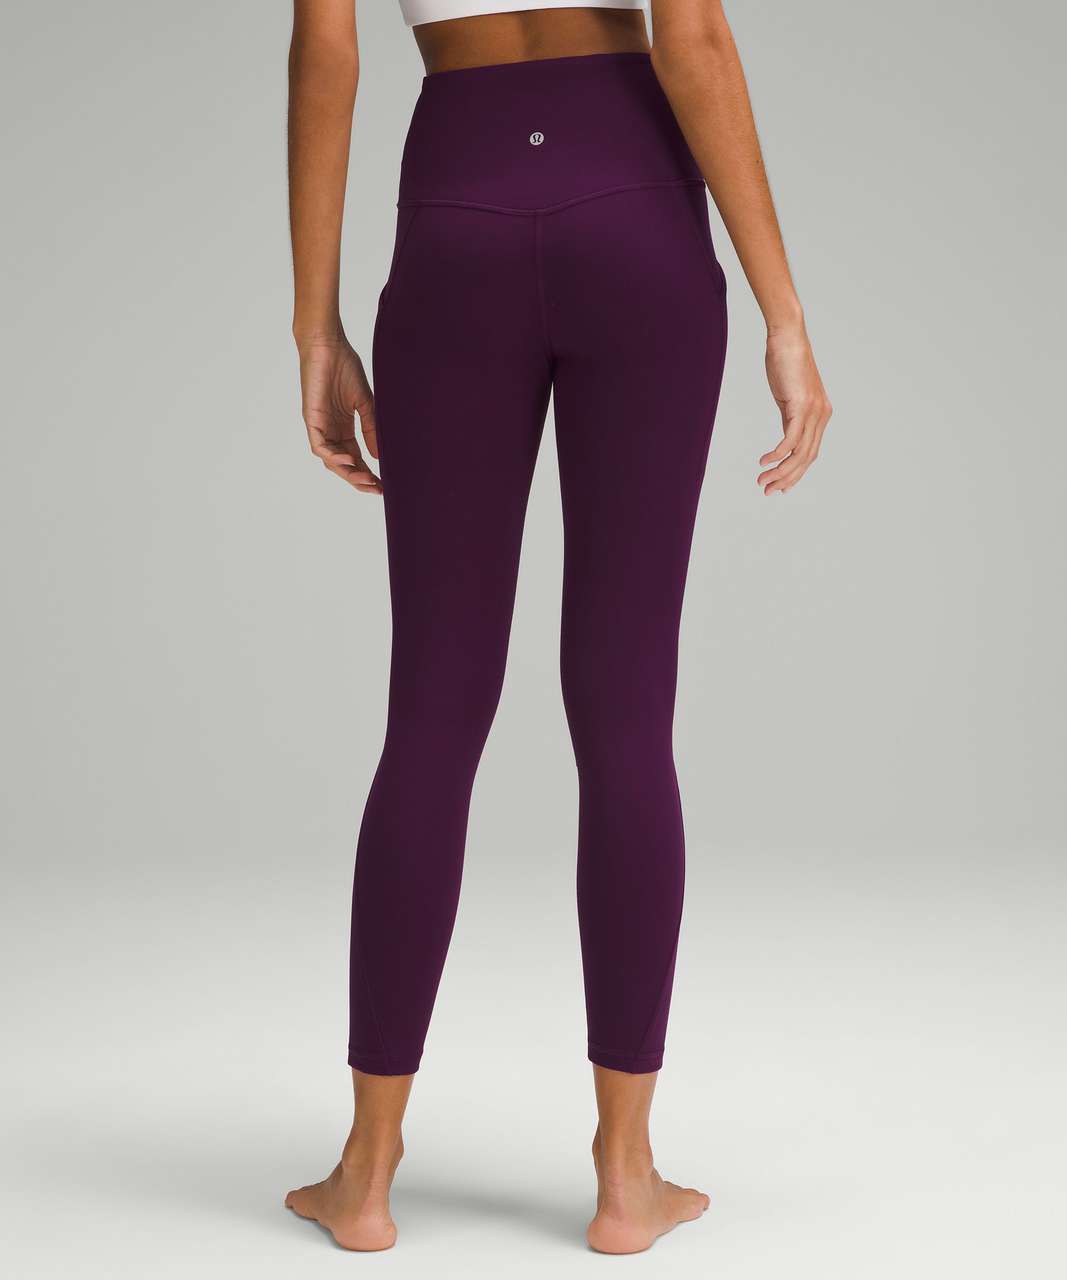 Lululemon Align High Rise Pant Leggings with Pockets Moonlit Magenta 12 Nwt  - $108 New With Tags - From Marie